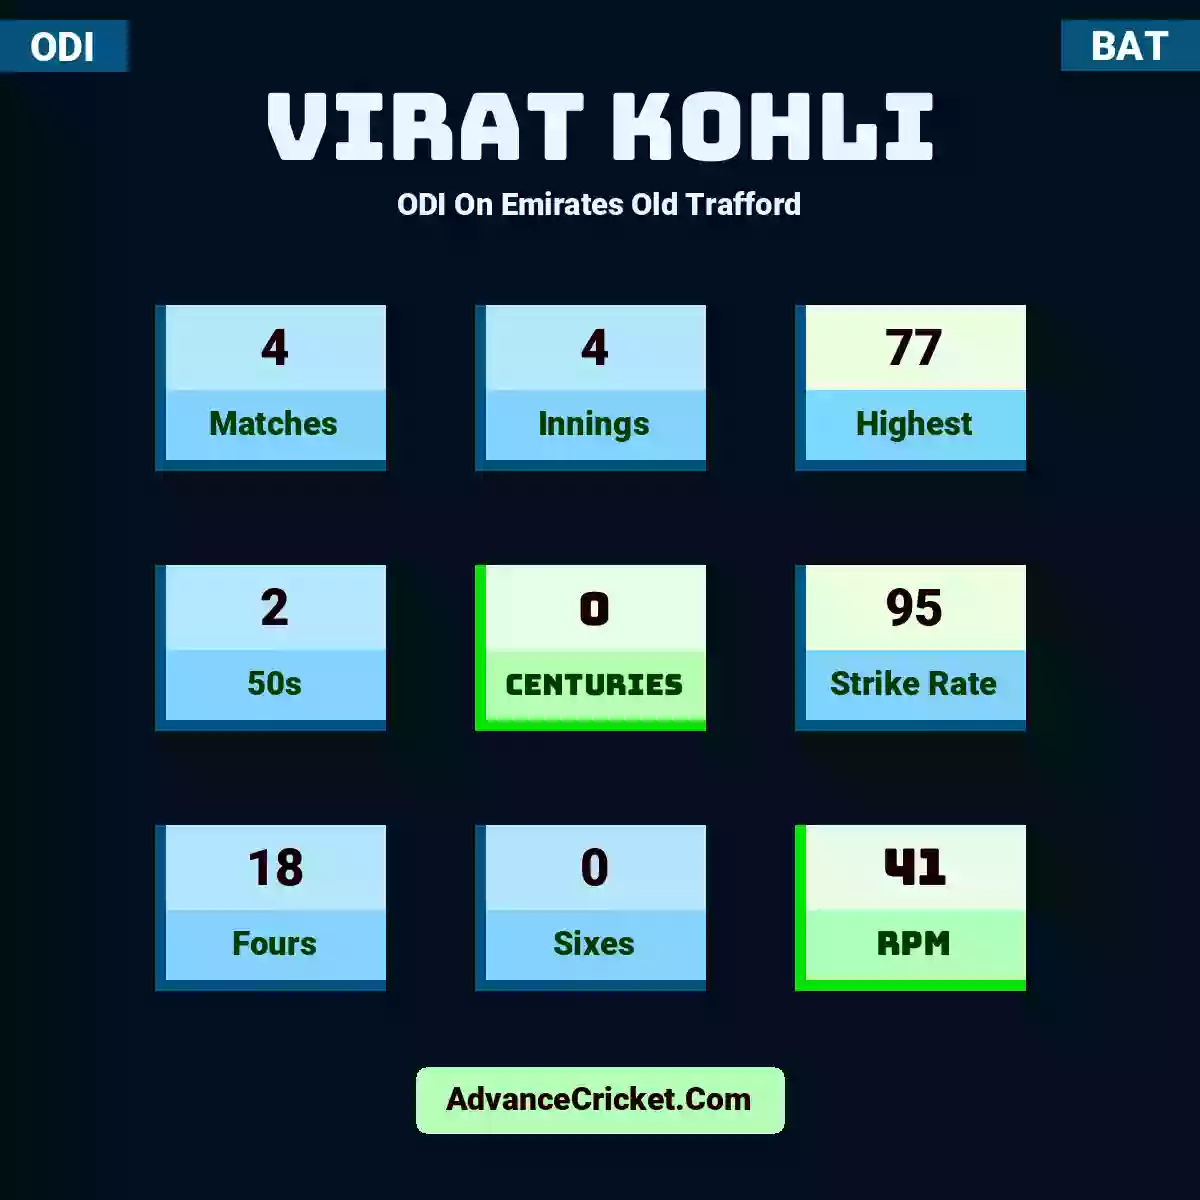 Virat Kohli ODI  On Emirates Old Trafford, Virat Kohli played 4 matches, scored 77 runs as highest, 2 half-centuries, and 0 centuries, with a strike rate of 95. V.Kohli hit 18 fours and 0 sixes, with an RPM of 41.